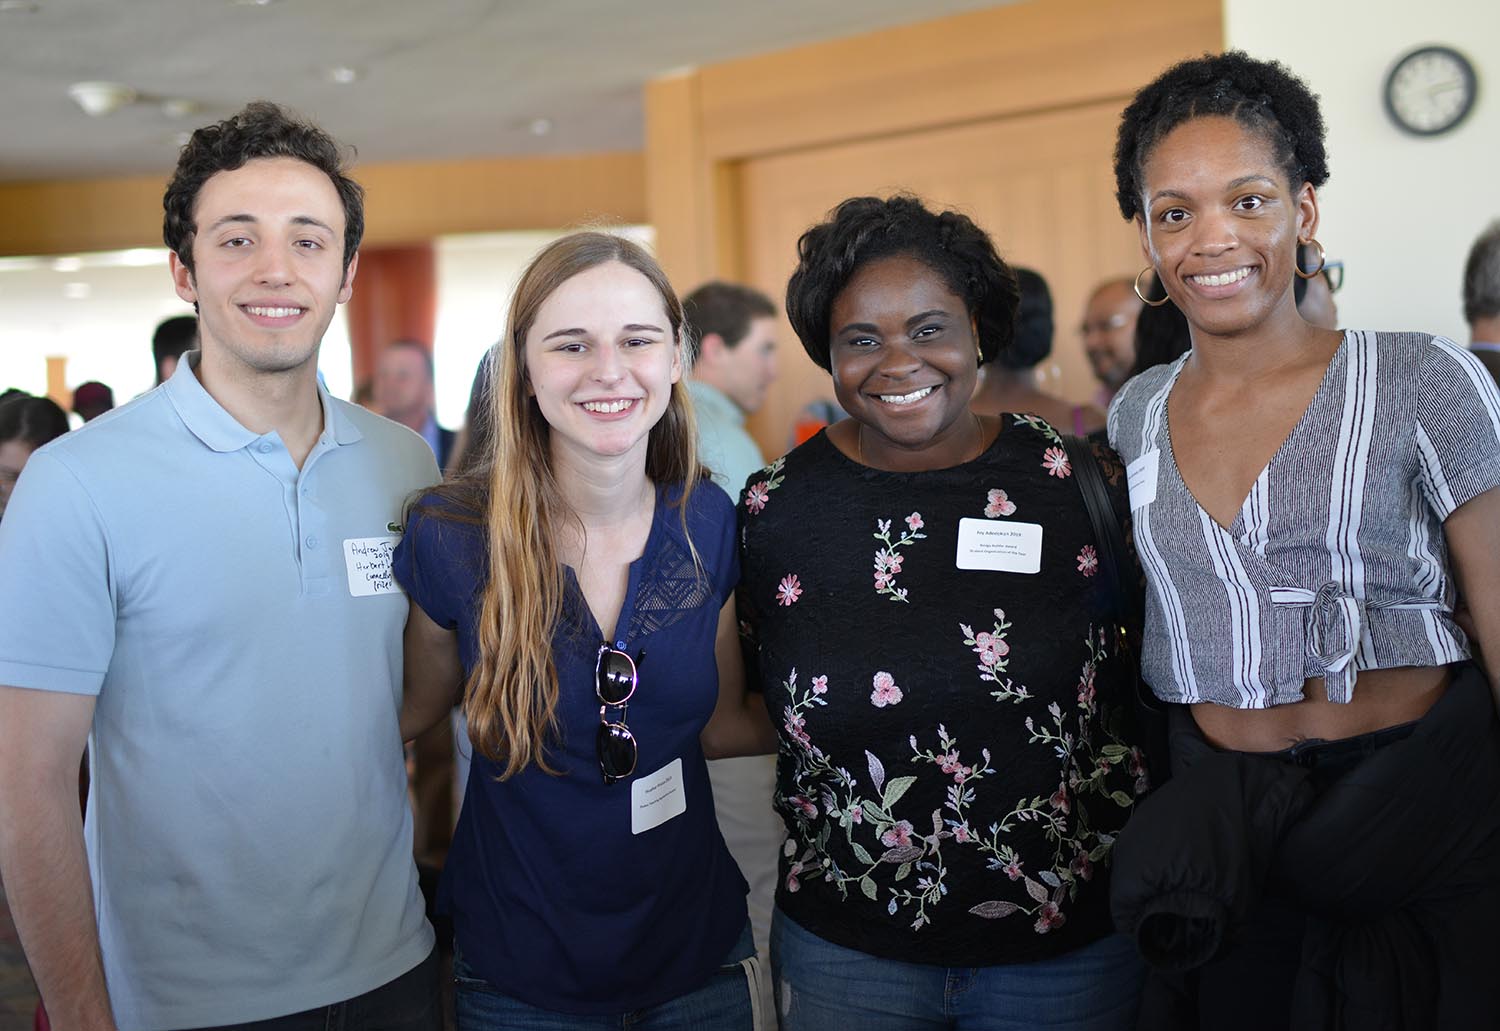 Andrew Jacono '19 won a Herbert Lee Connelly Prize for demonstrating an interest in English literature. Heather Pincus '19 won a Plukas Teaching Apprentice Award for excellent service to the Economics Departments as a teaching apprentice. Joy Adedokun '19 won a Bridge Builder Award for succeeded in strengthening the relationship between Wesleyan and the greater Middletown community. Zoe Garvey '20 won the Dr. Neil Clendeninn Prize for achieved academic excellence in biology and/or molecular biology and biochemistry.